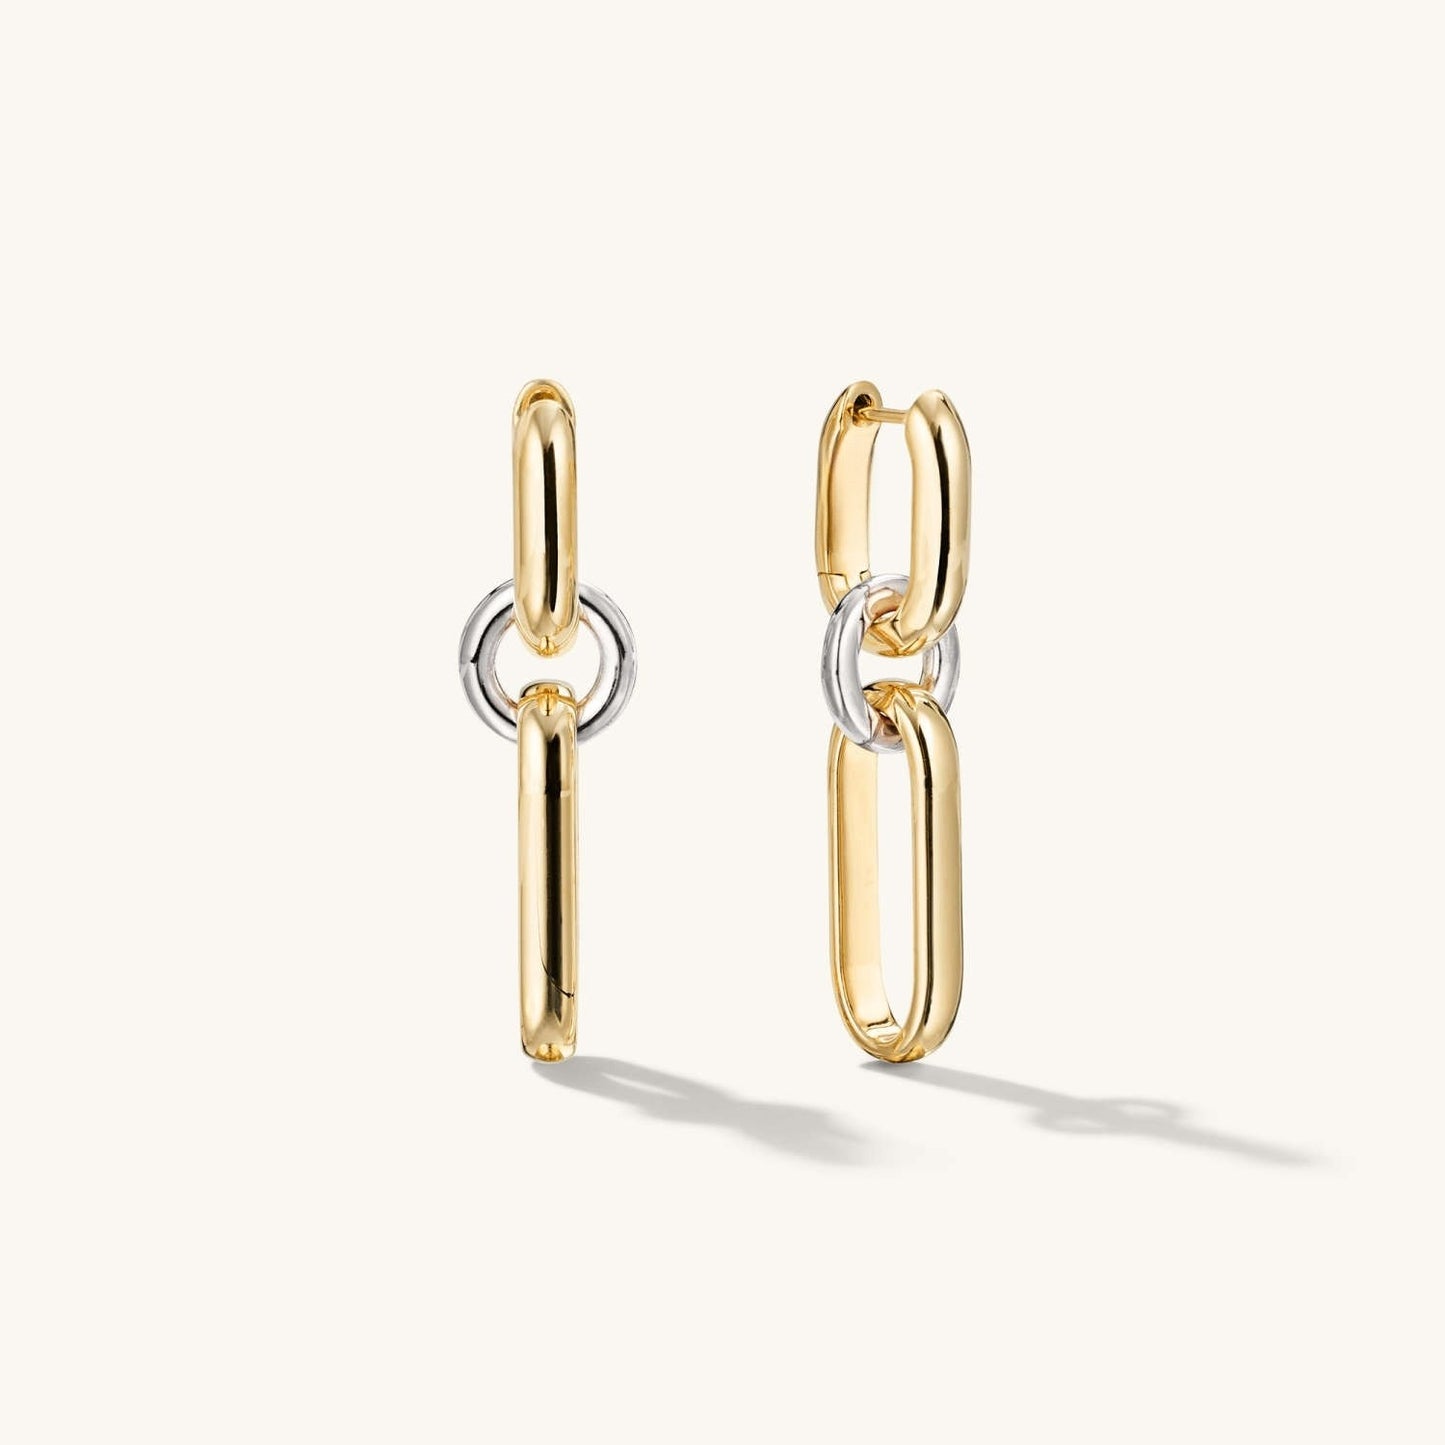 Unique 14K Solid Gold Mixed Convertible Link Earring